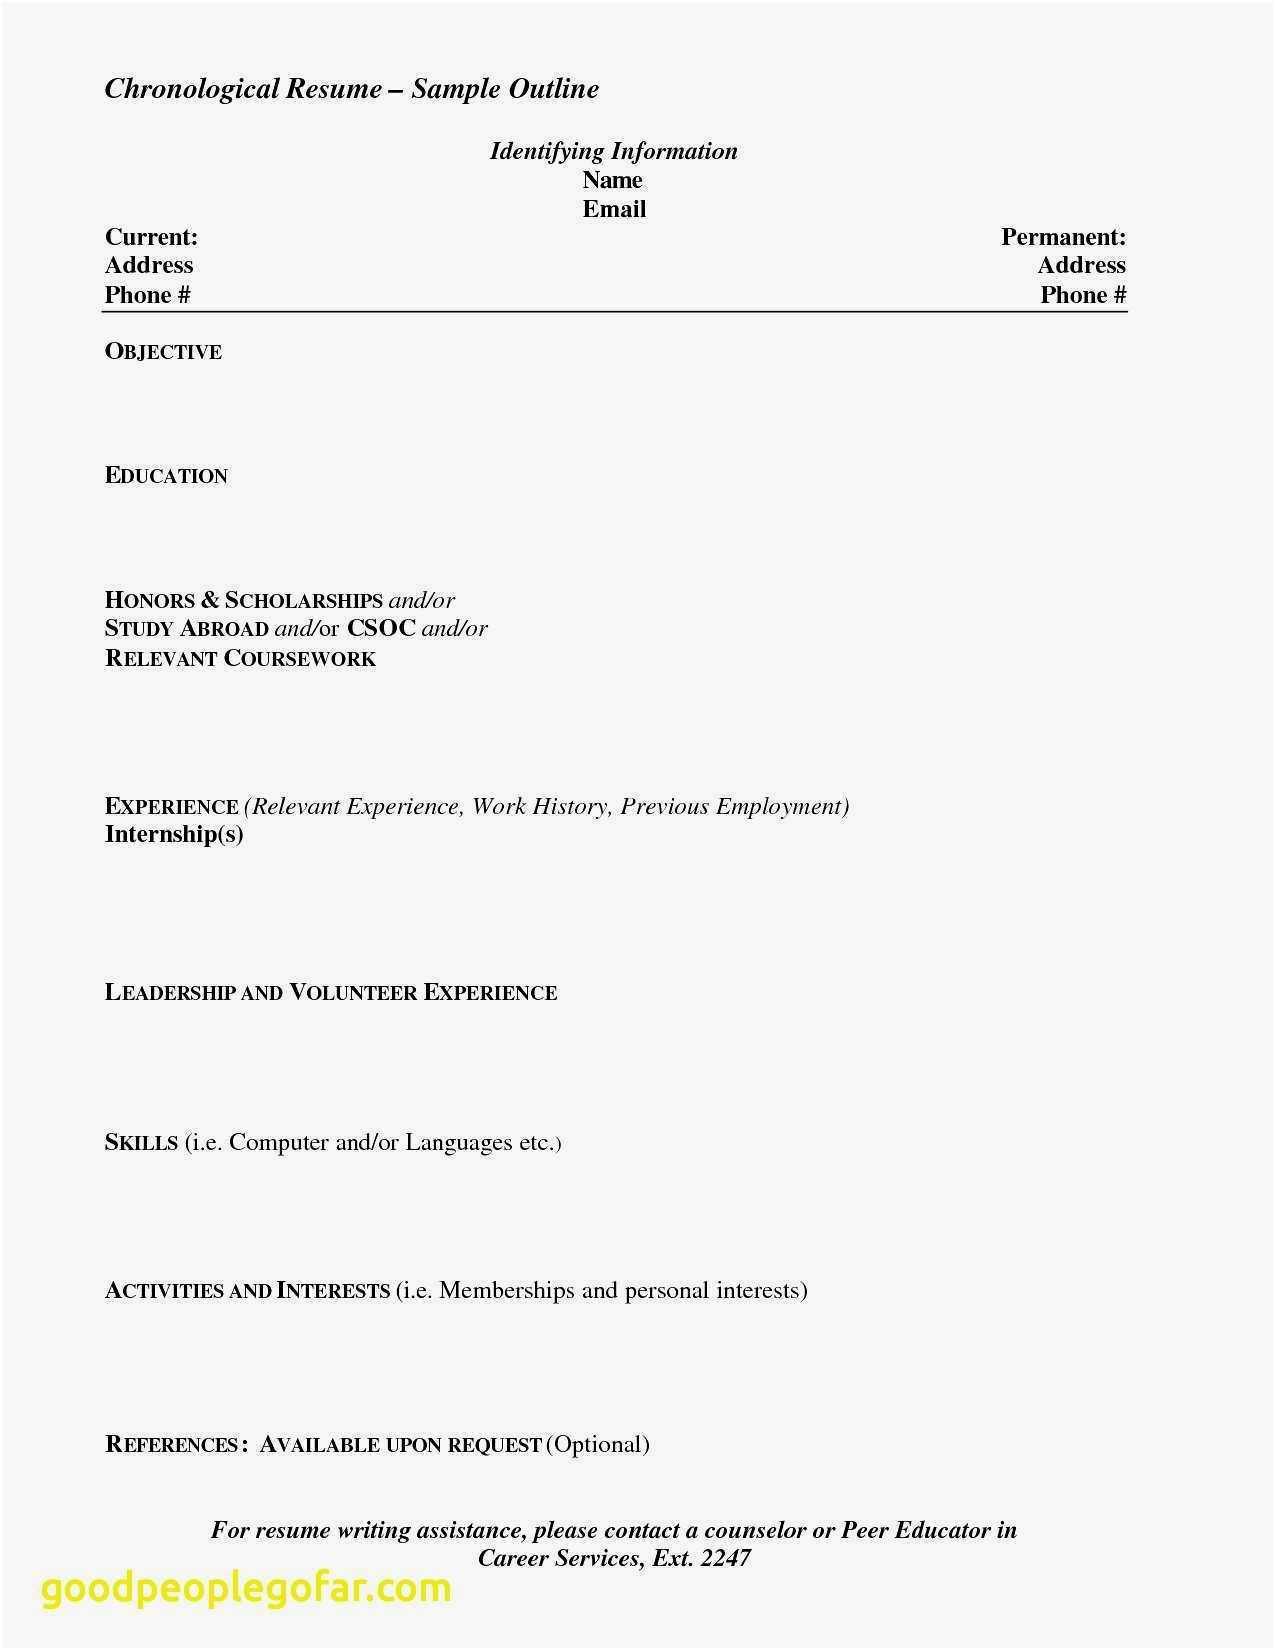 Personal Narrative Peer Review Worksheet and Inspirational Resume for Highschool Students Excellent Resumes 0d